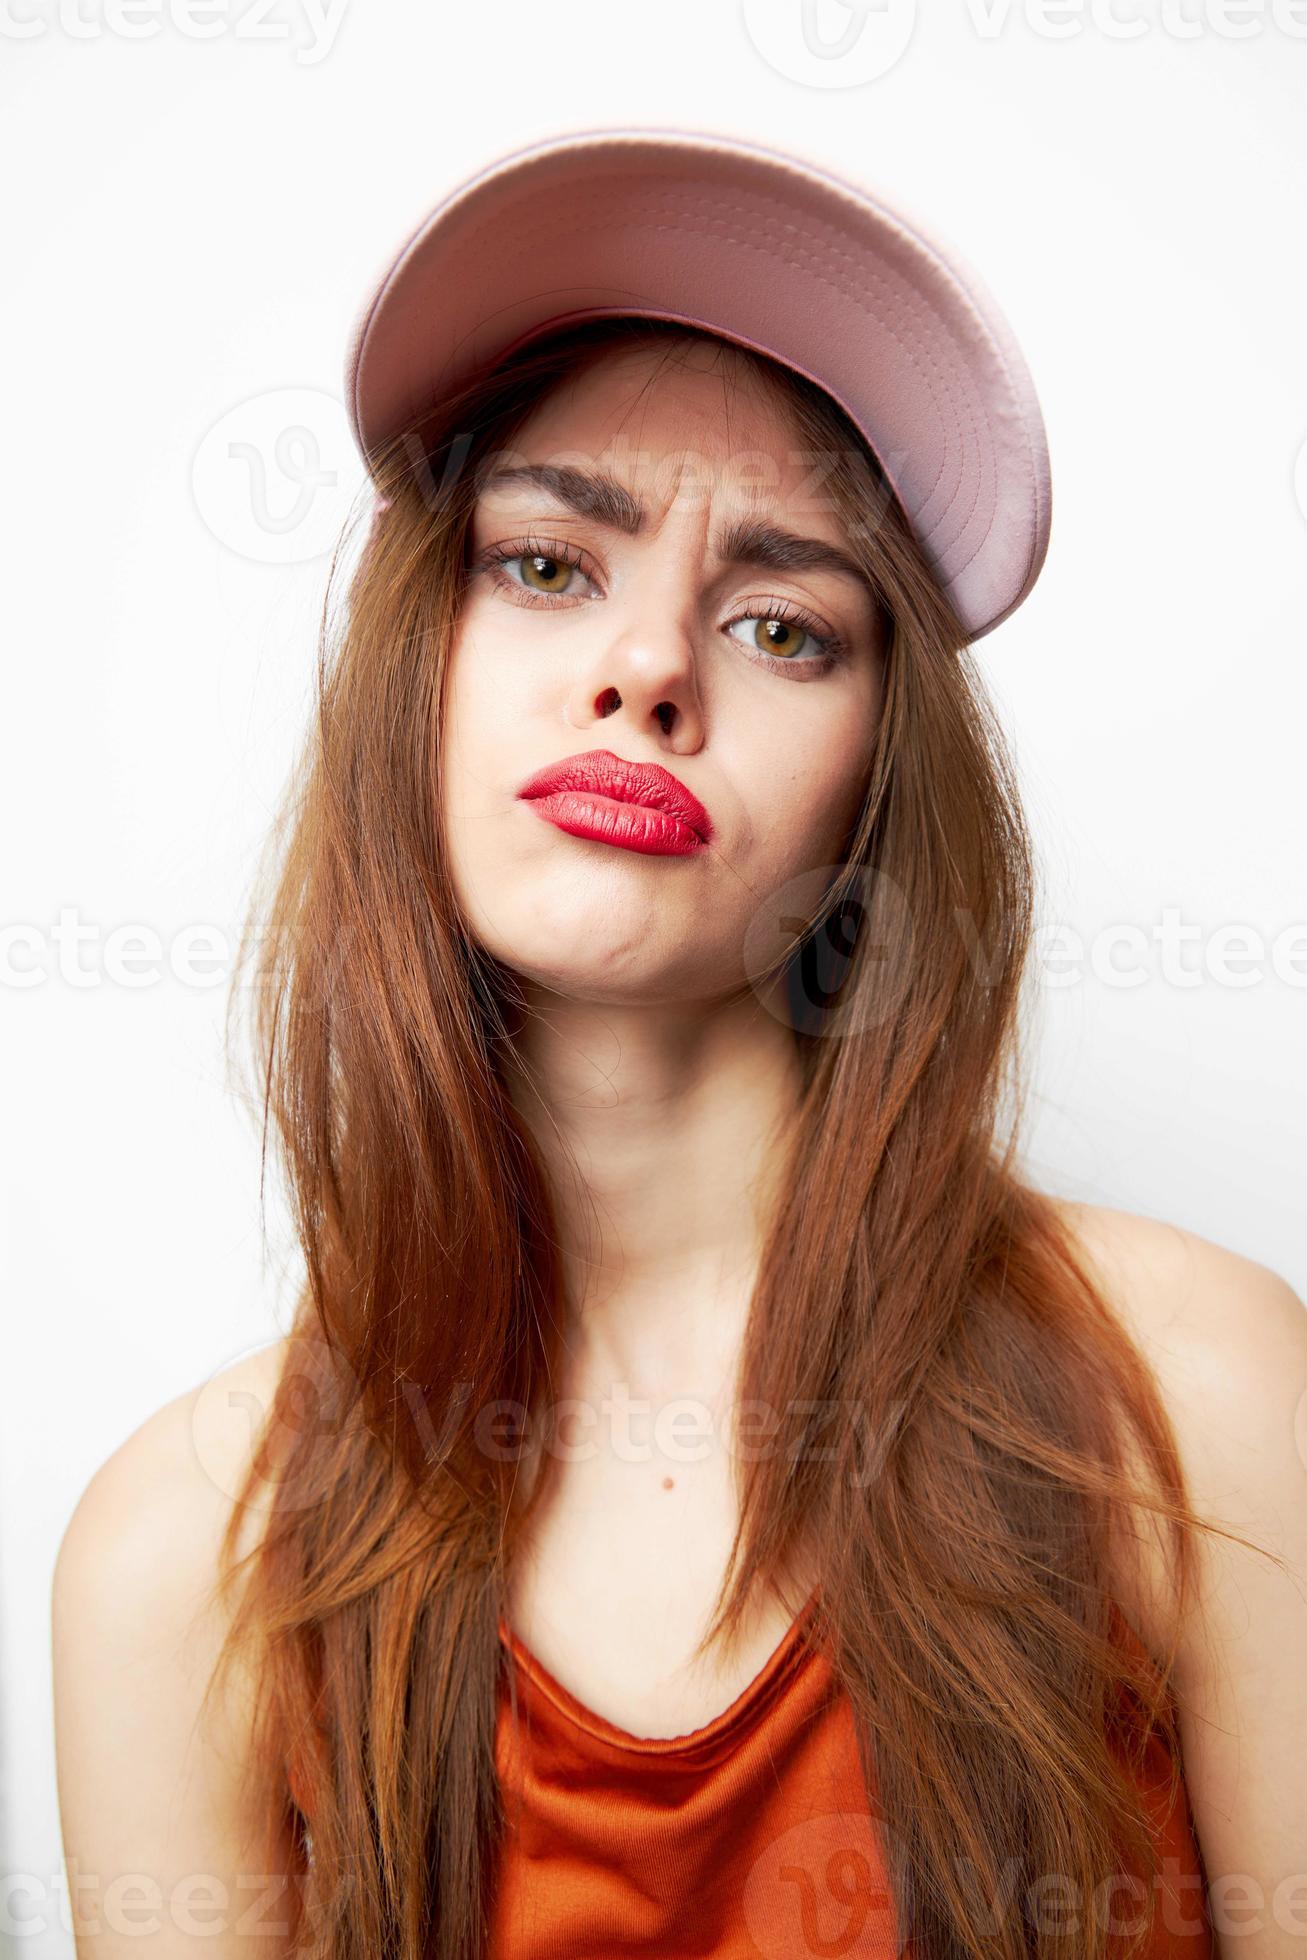 Woman in a cap Cheeky glamor model red sundress 22332067 Stock Photo at ...